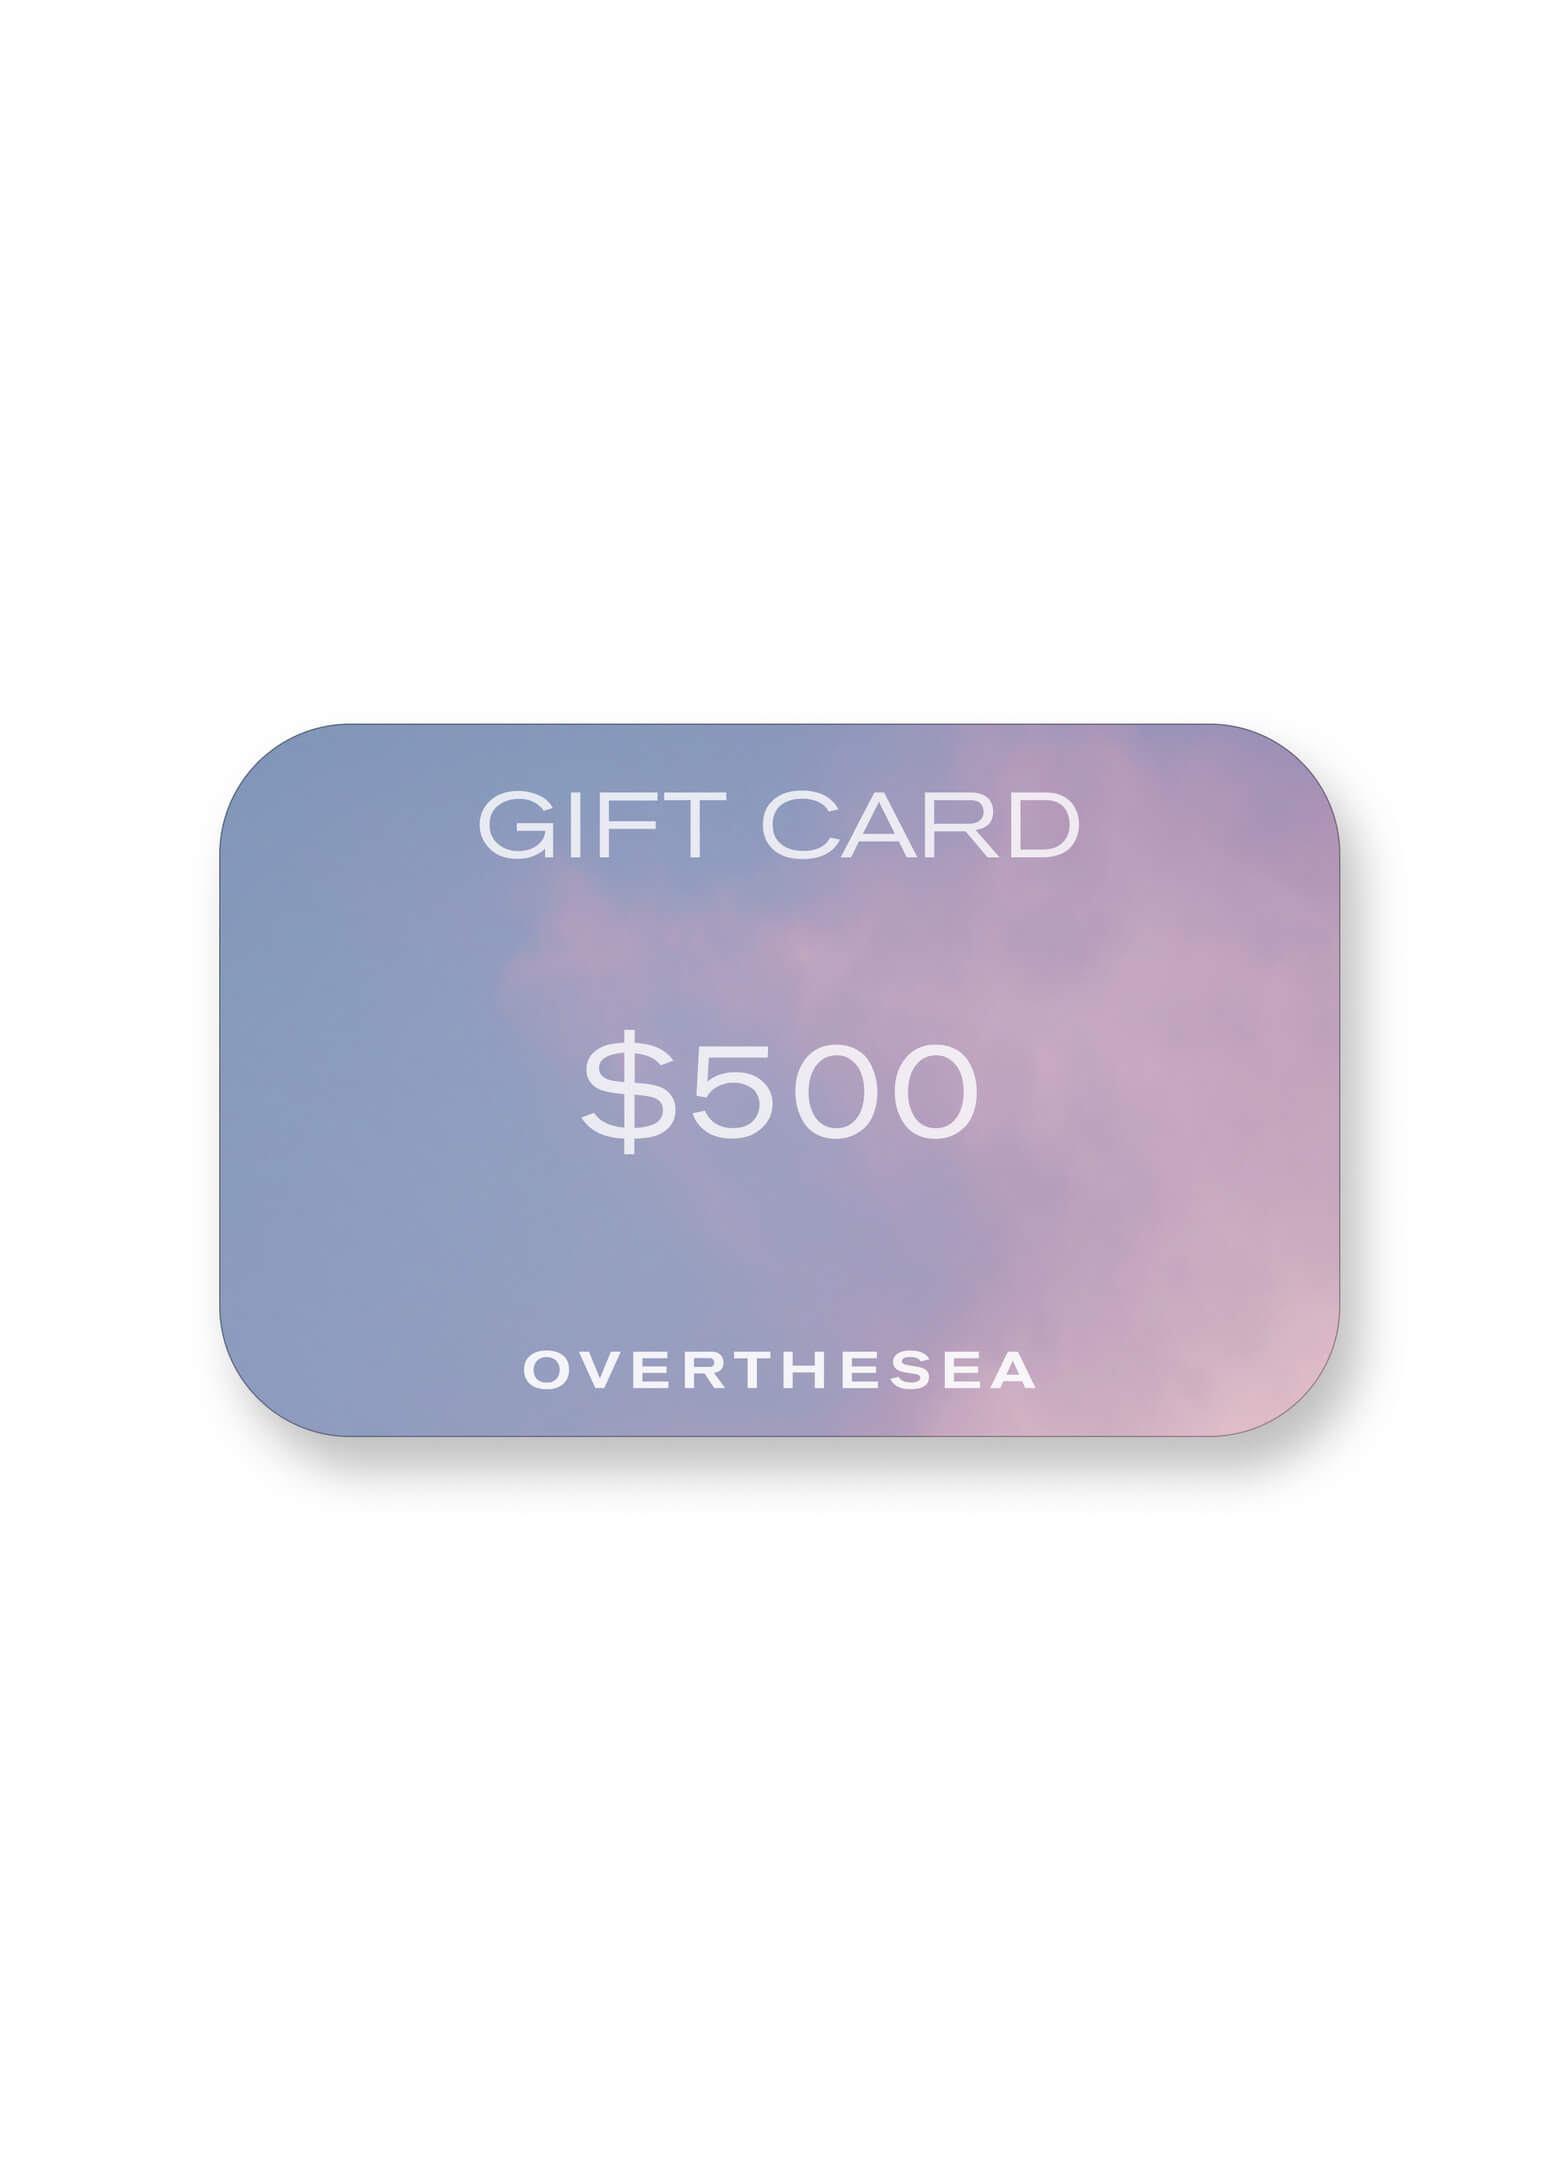 Gift Card image featured